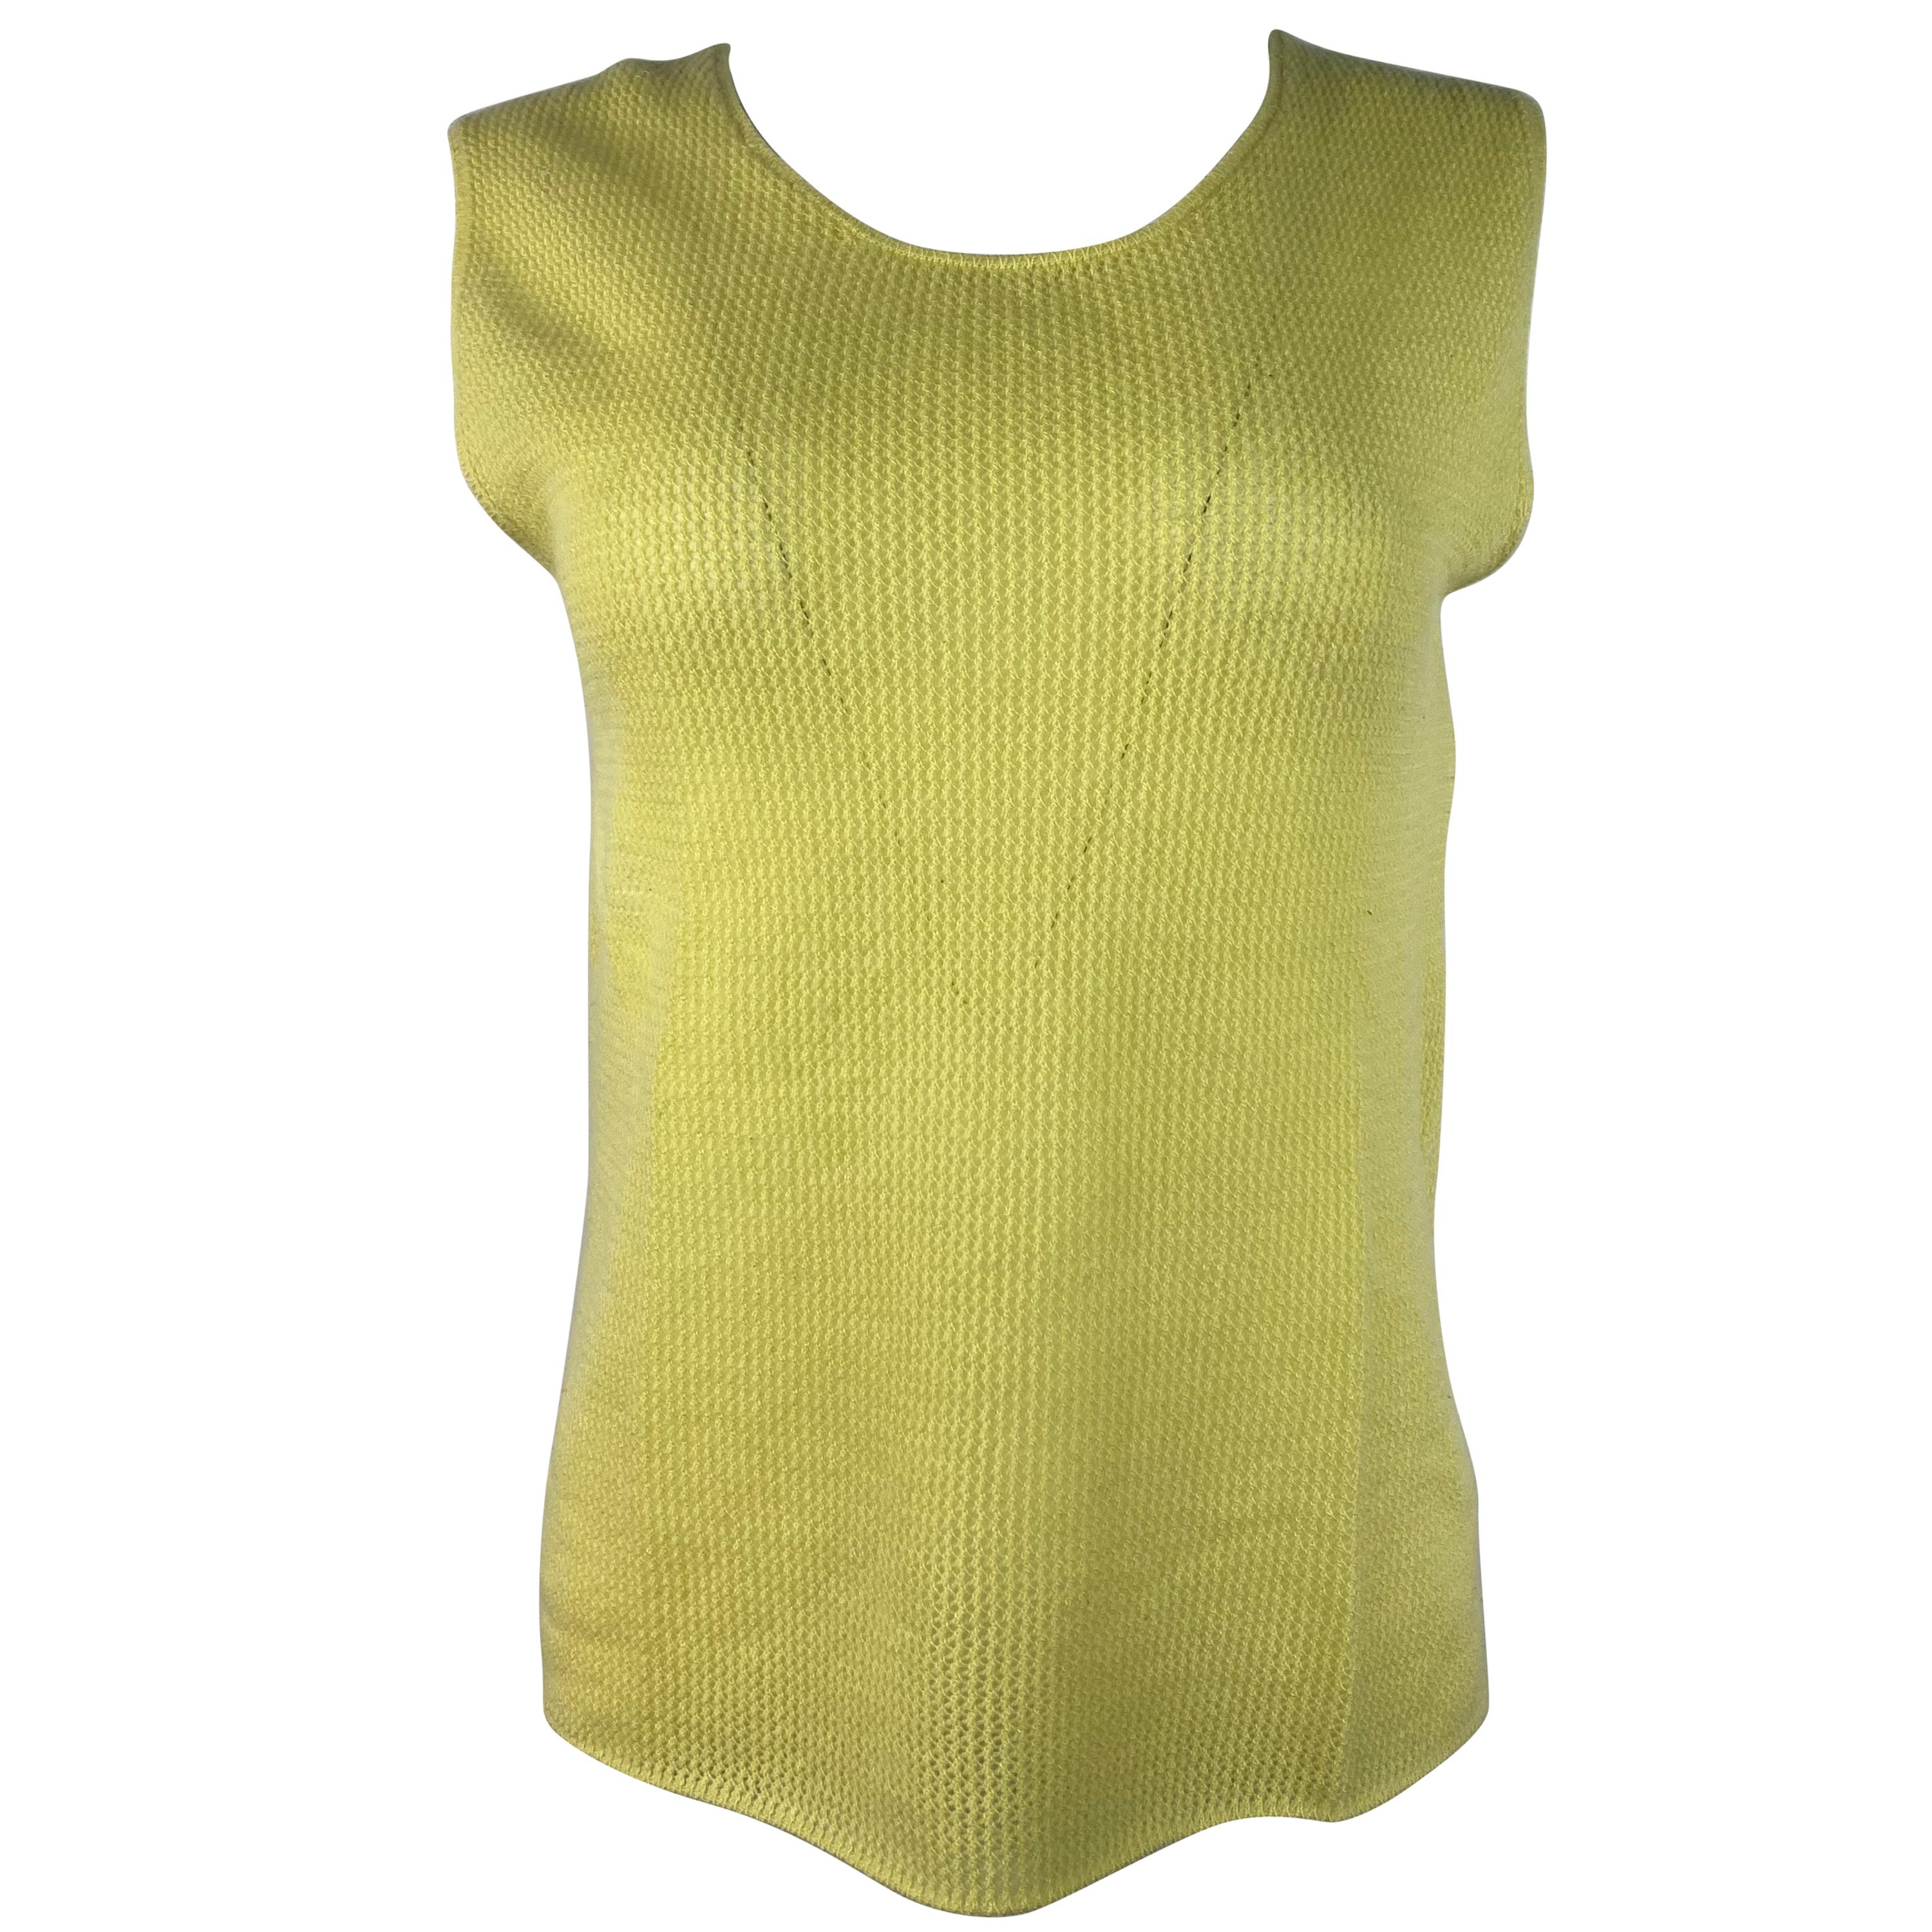 Vintage CHANEL Yellow Cashmere Knit Top, Size 42 For Sale